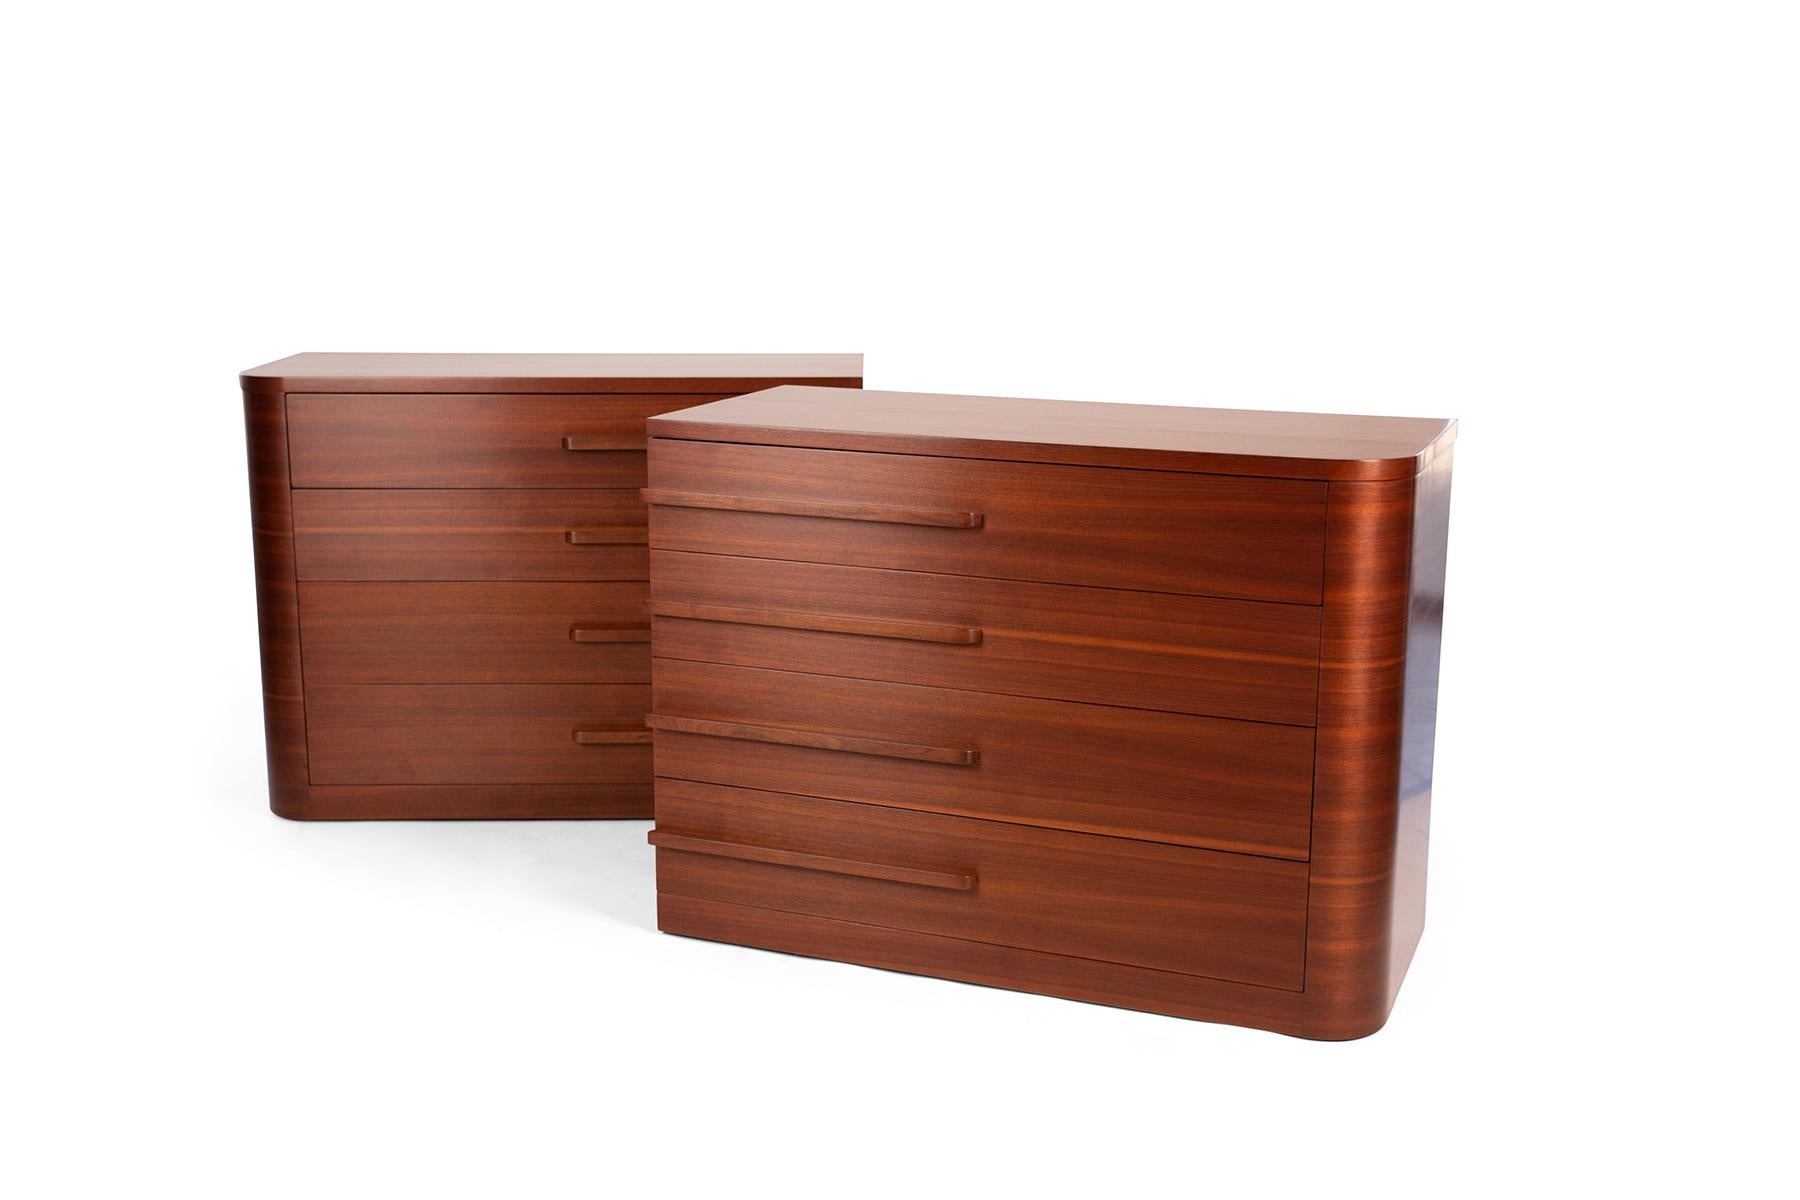 This chest of drawers pair was created in the 1930s by Art Deco master and designer of Radio City Music Hall, Donald Deskey. The pair reflect one of Deskey's sleek signatures by showing a combination of both right angles and curves. The matching